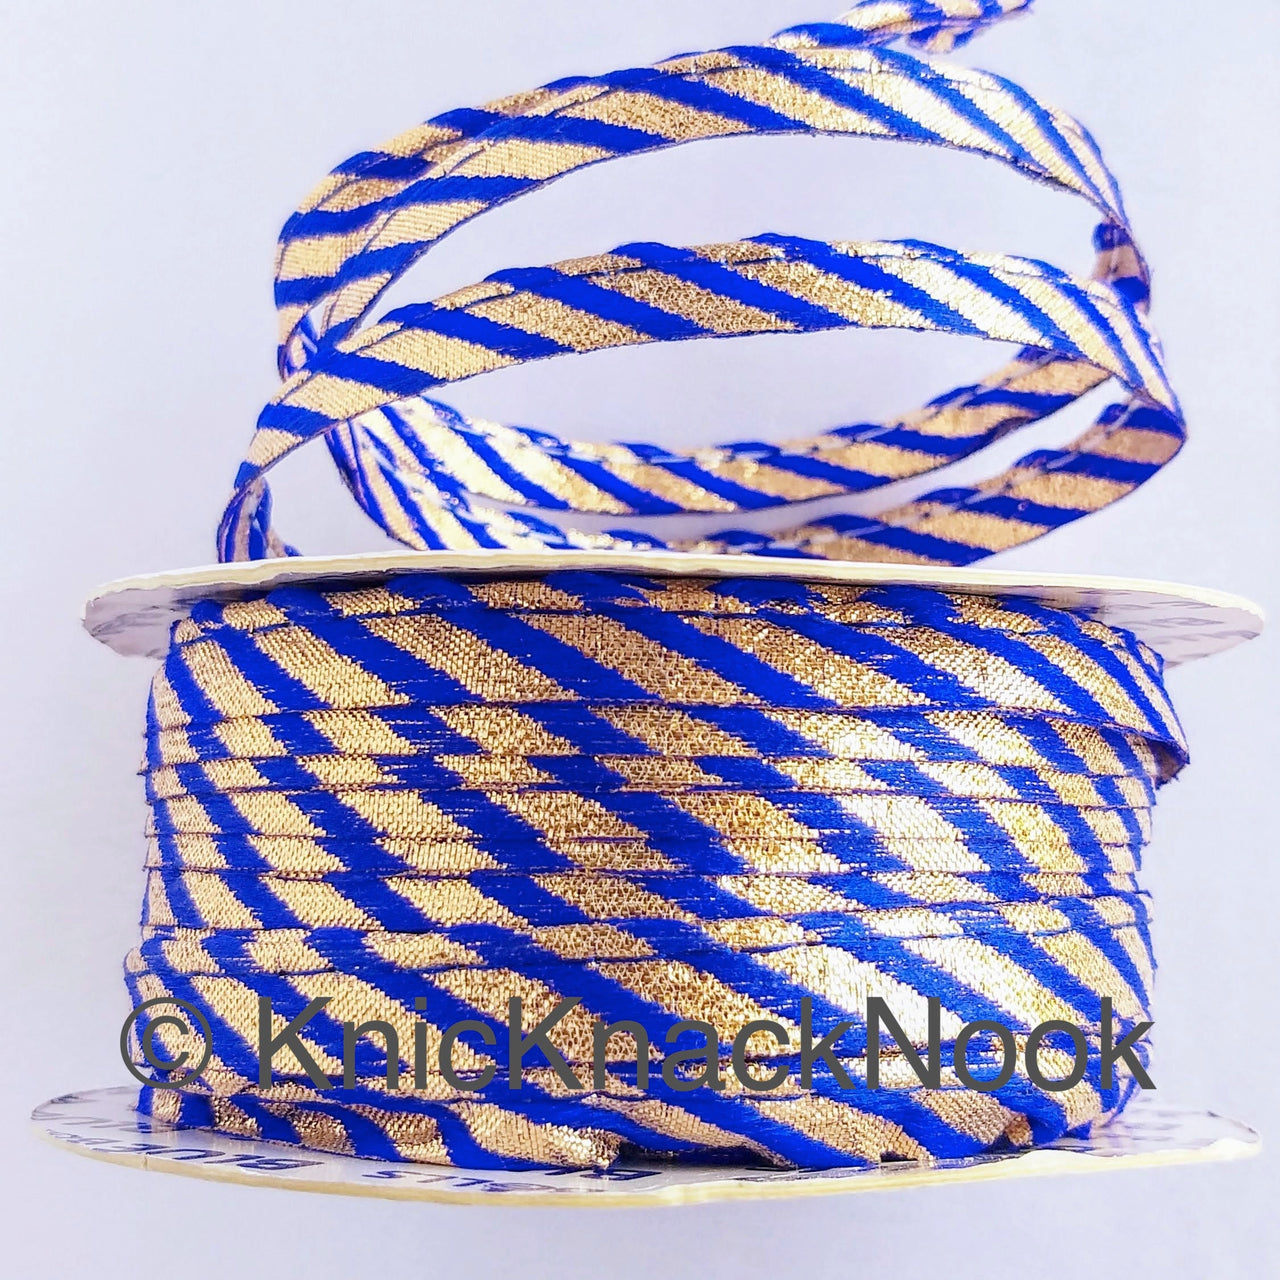 Wholesale 2mm Flanged Insertion Piping on 10mm Band Stripes Cord Trim, Cord Piping Trim, Decorative Sewing Edge Trim